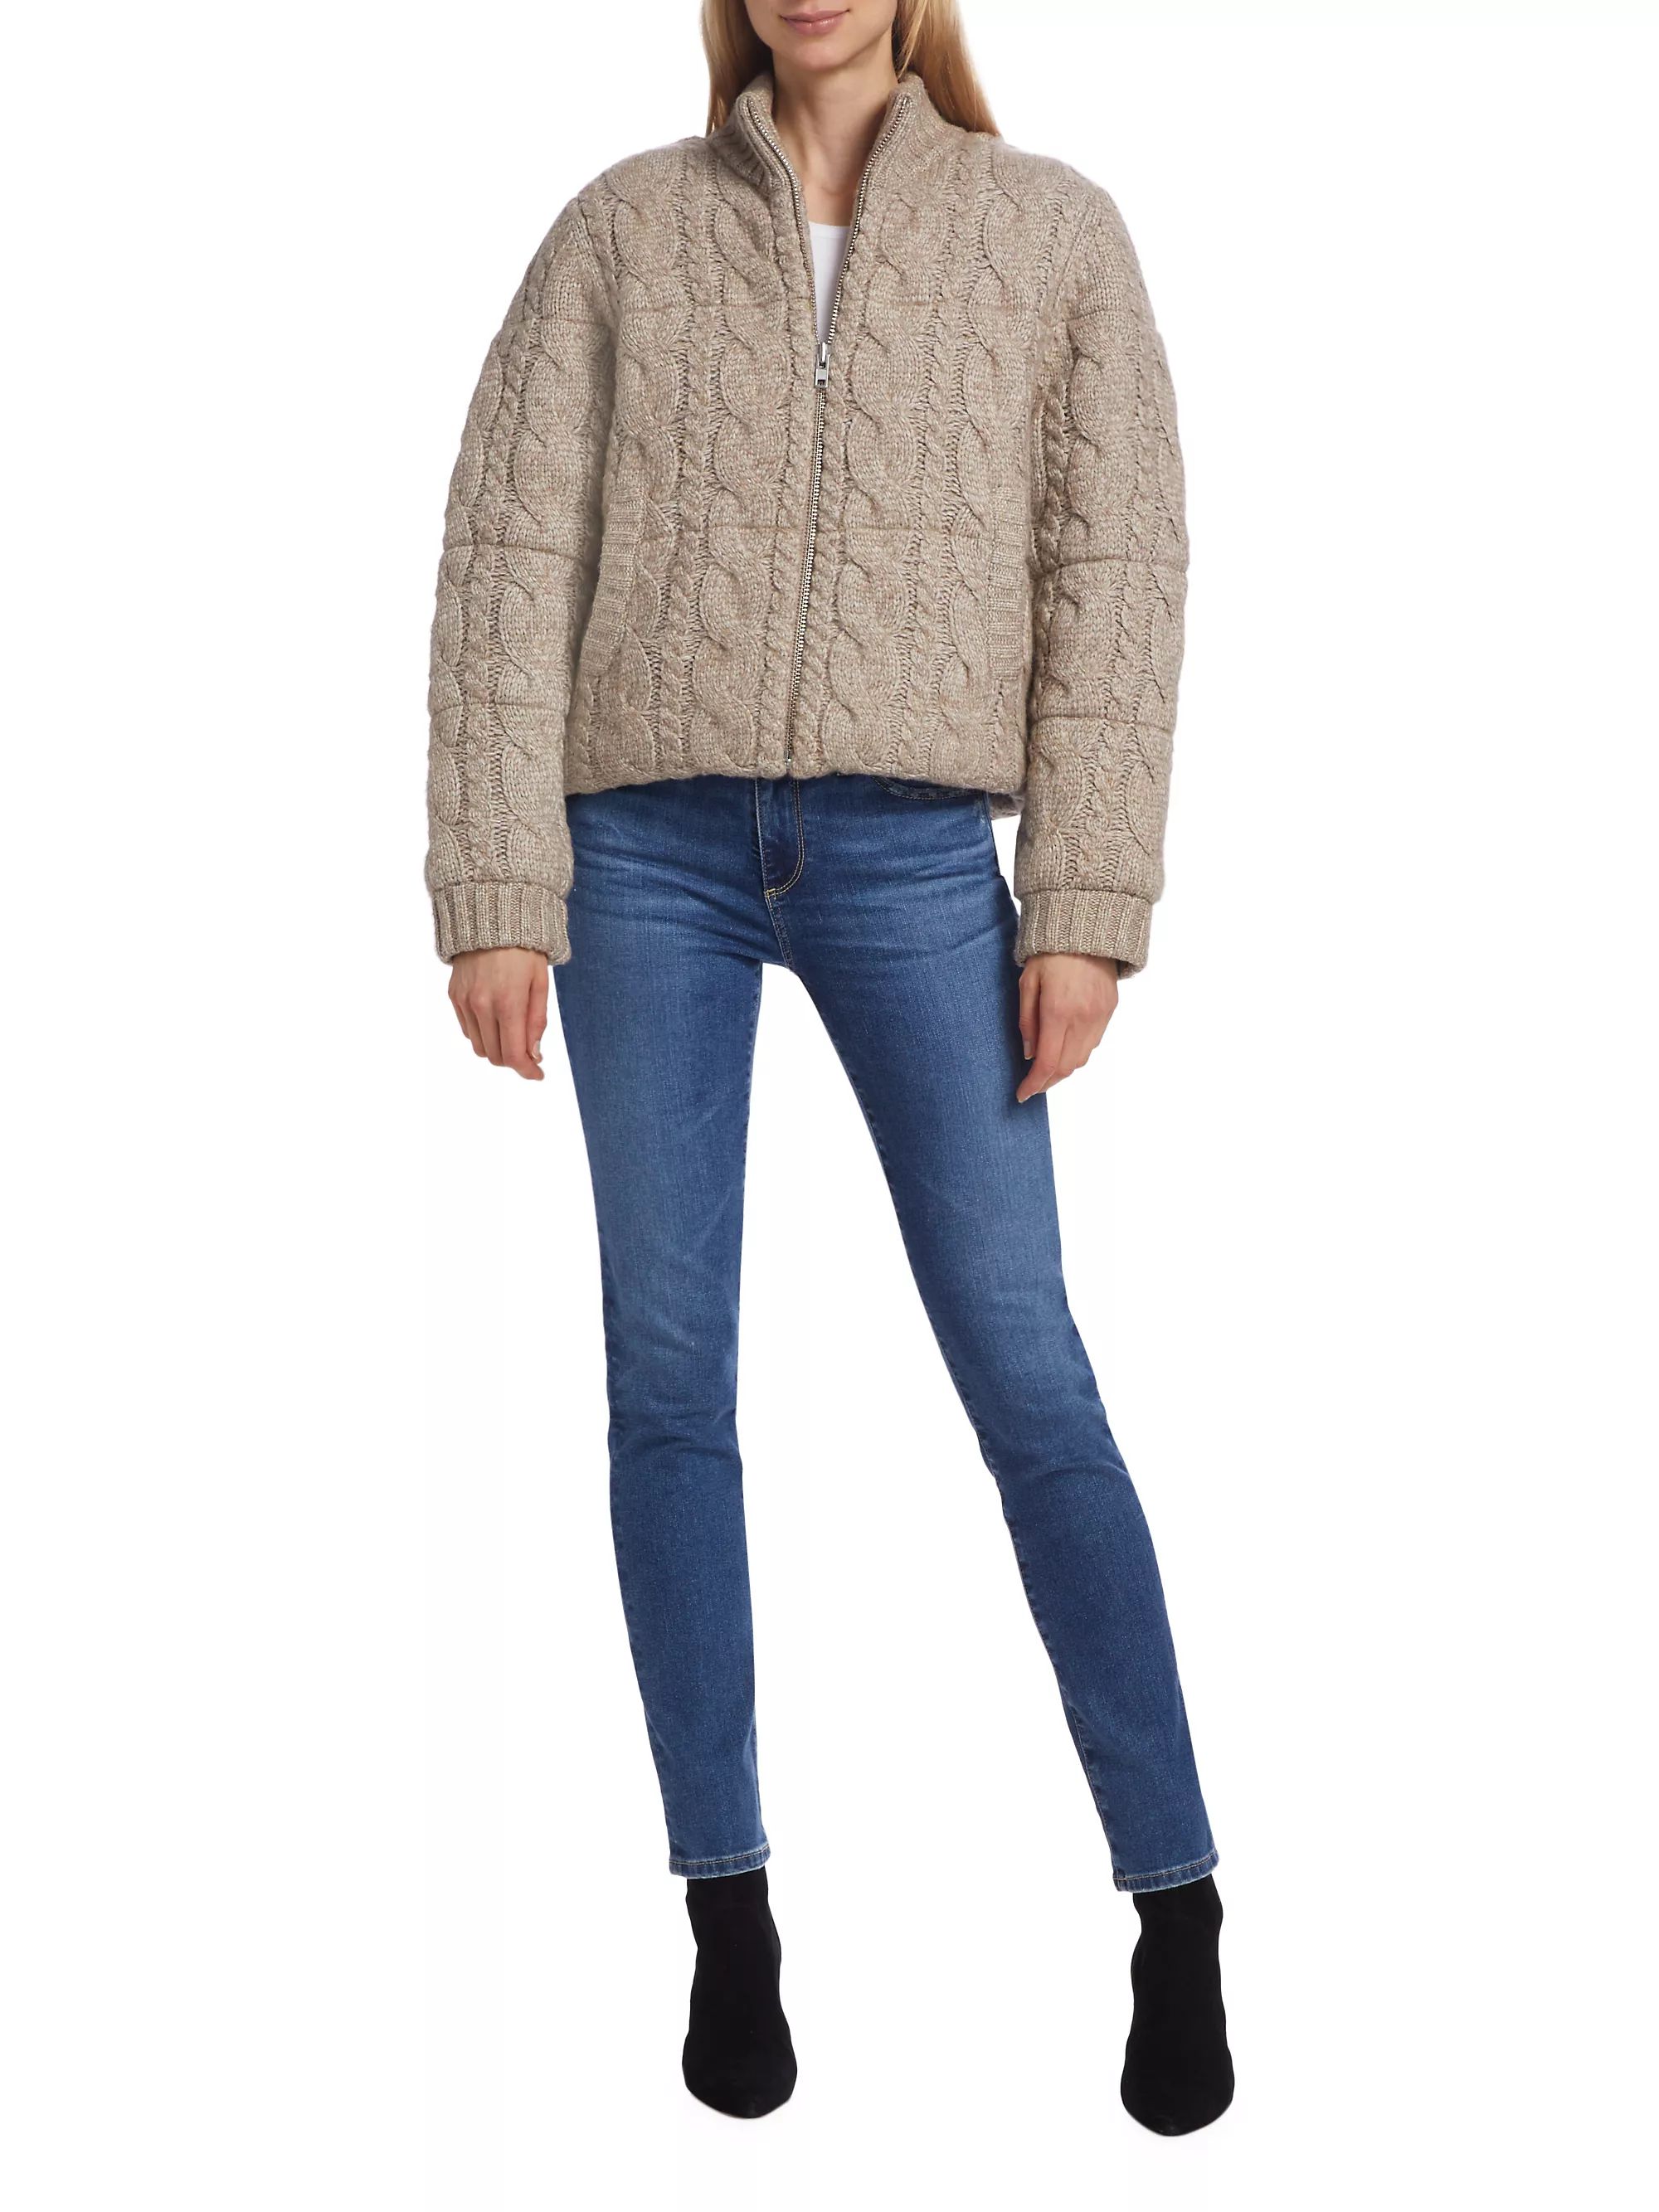 Aspen Cable-Knit Sweater Jacket | Saks Fifth Avenue